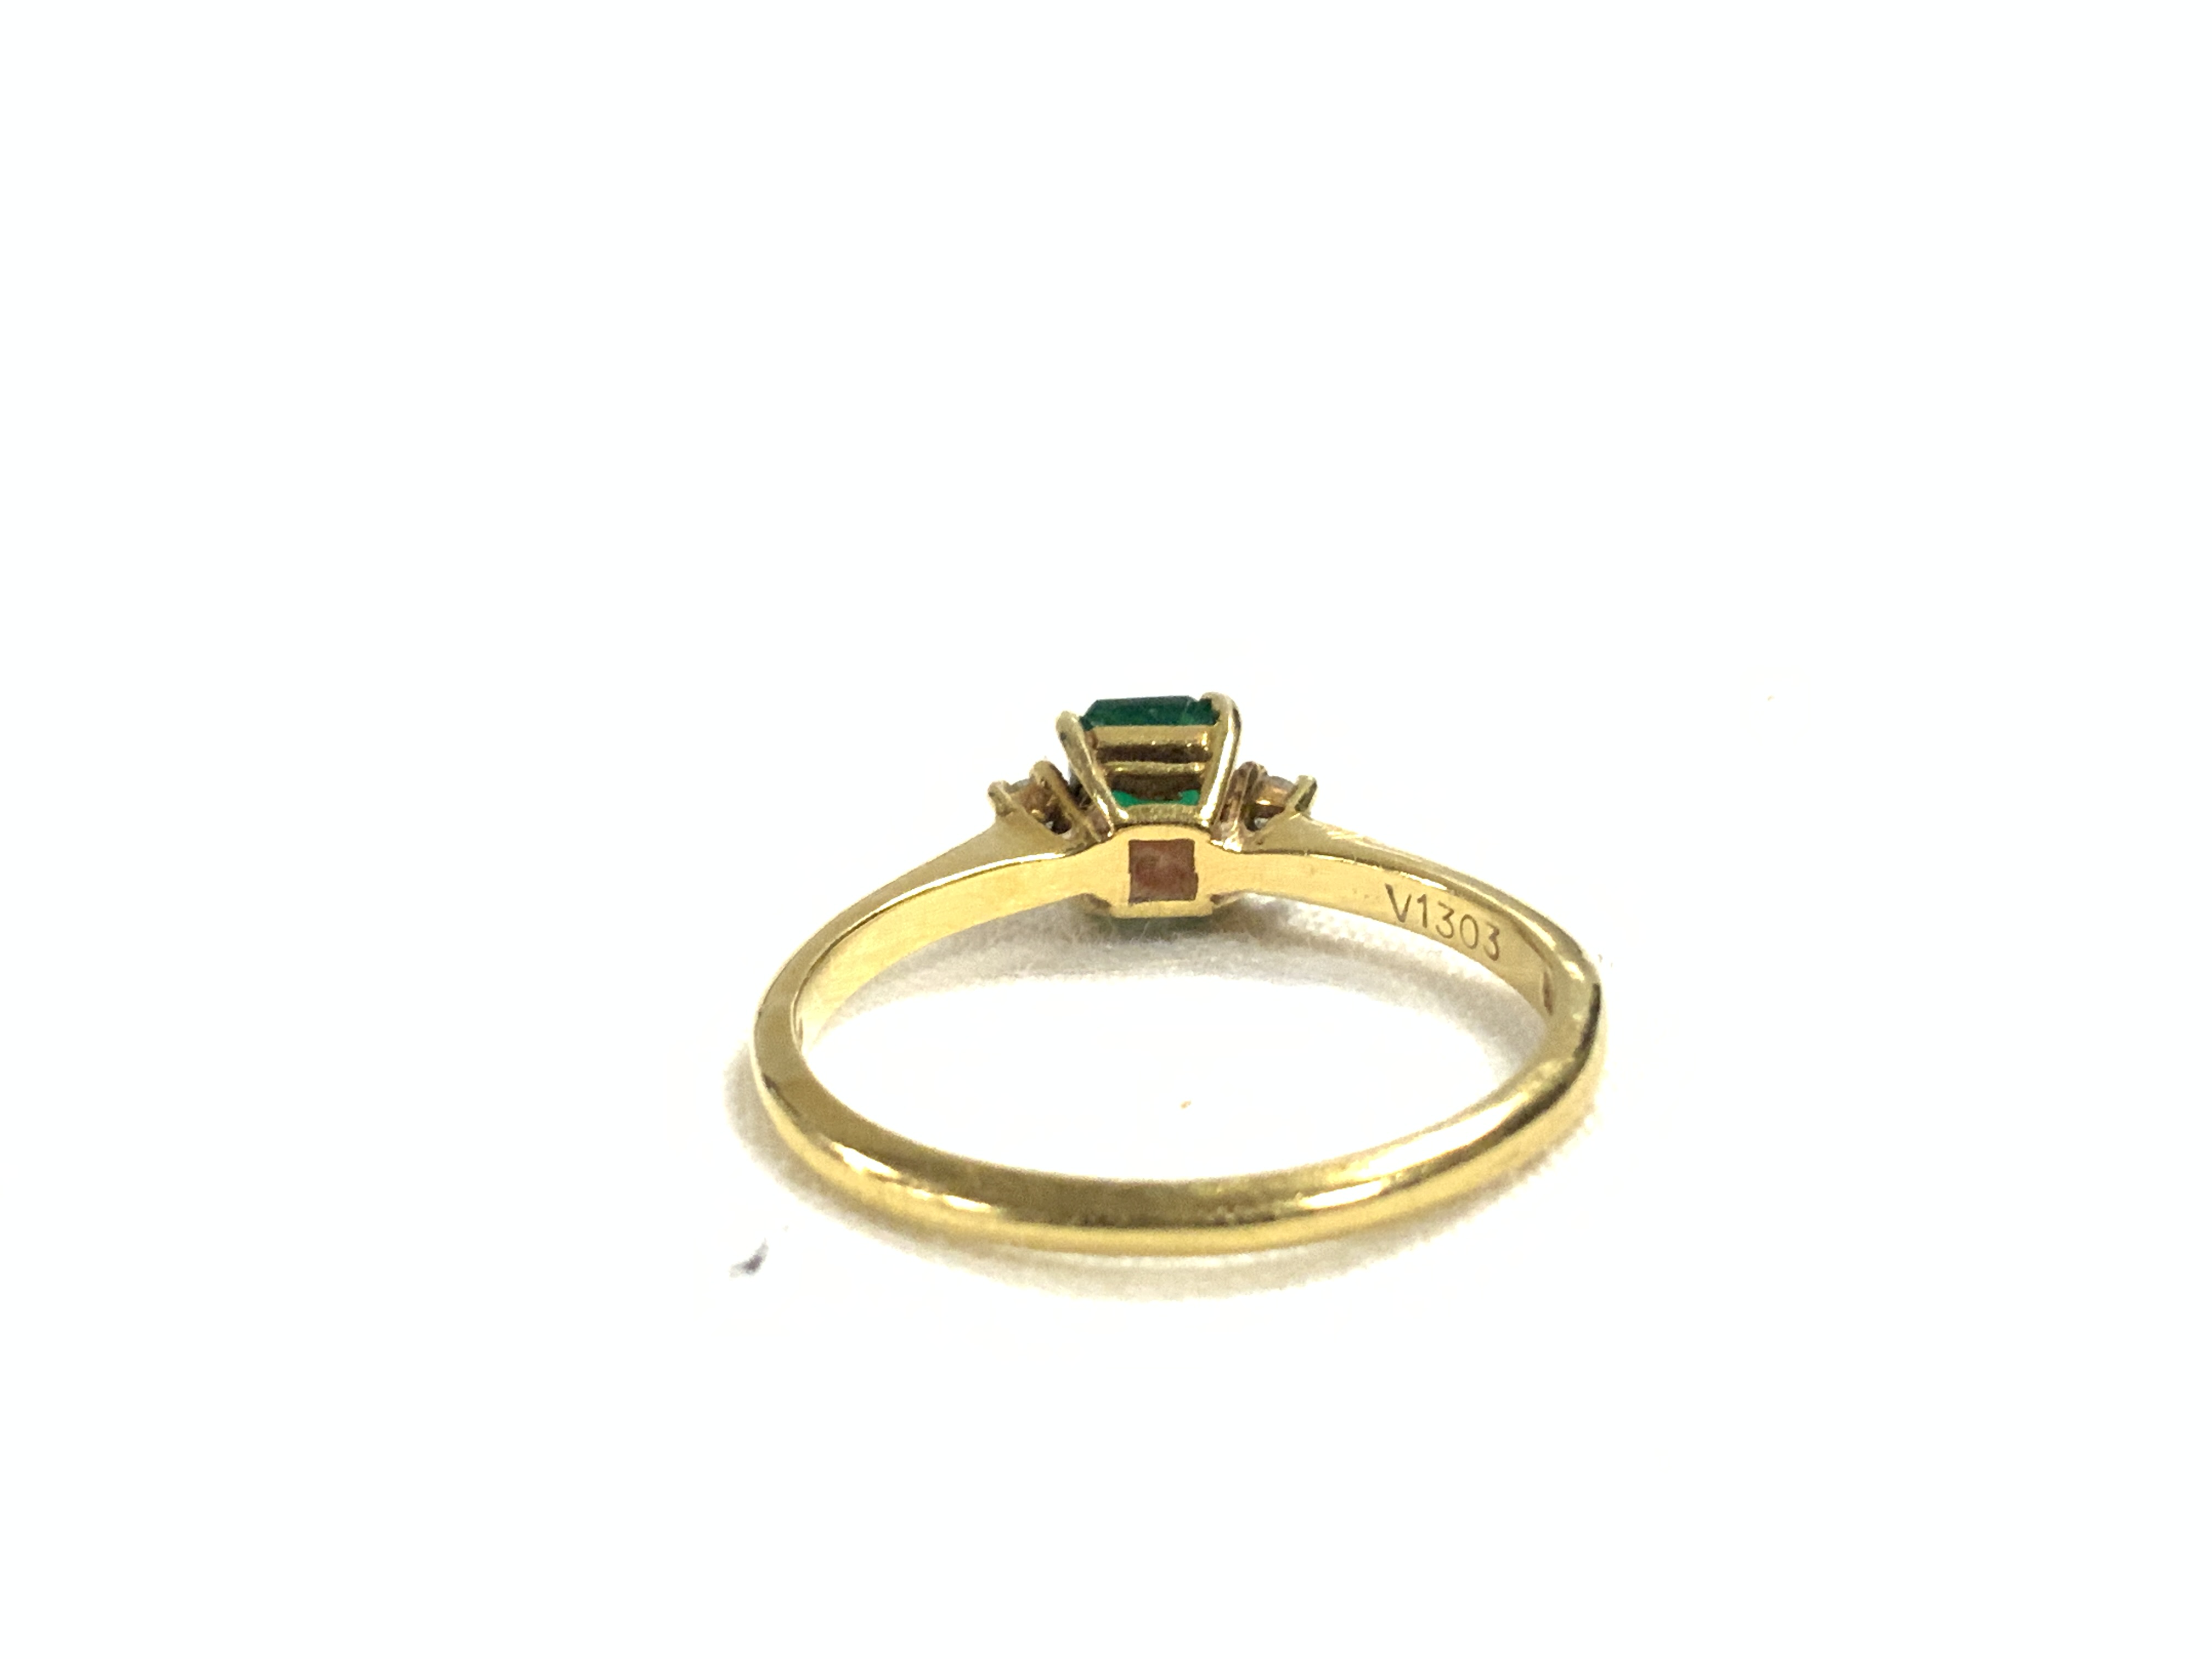 750 GOLD RING WITH DIAMOND AND JADE STONES SIZE L - Image 6 of 6